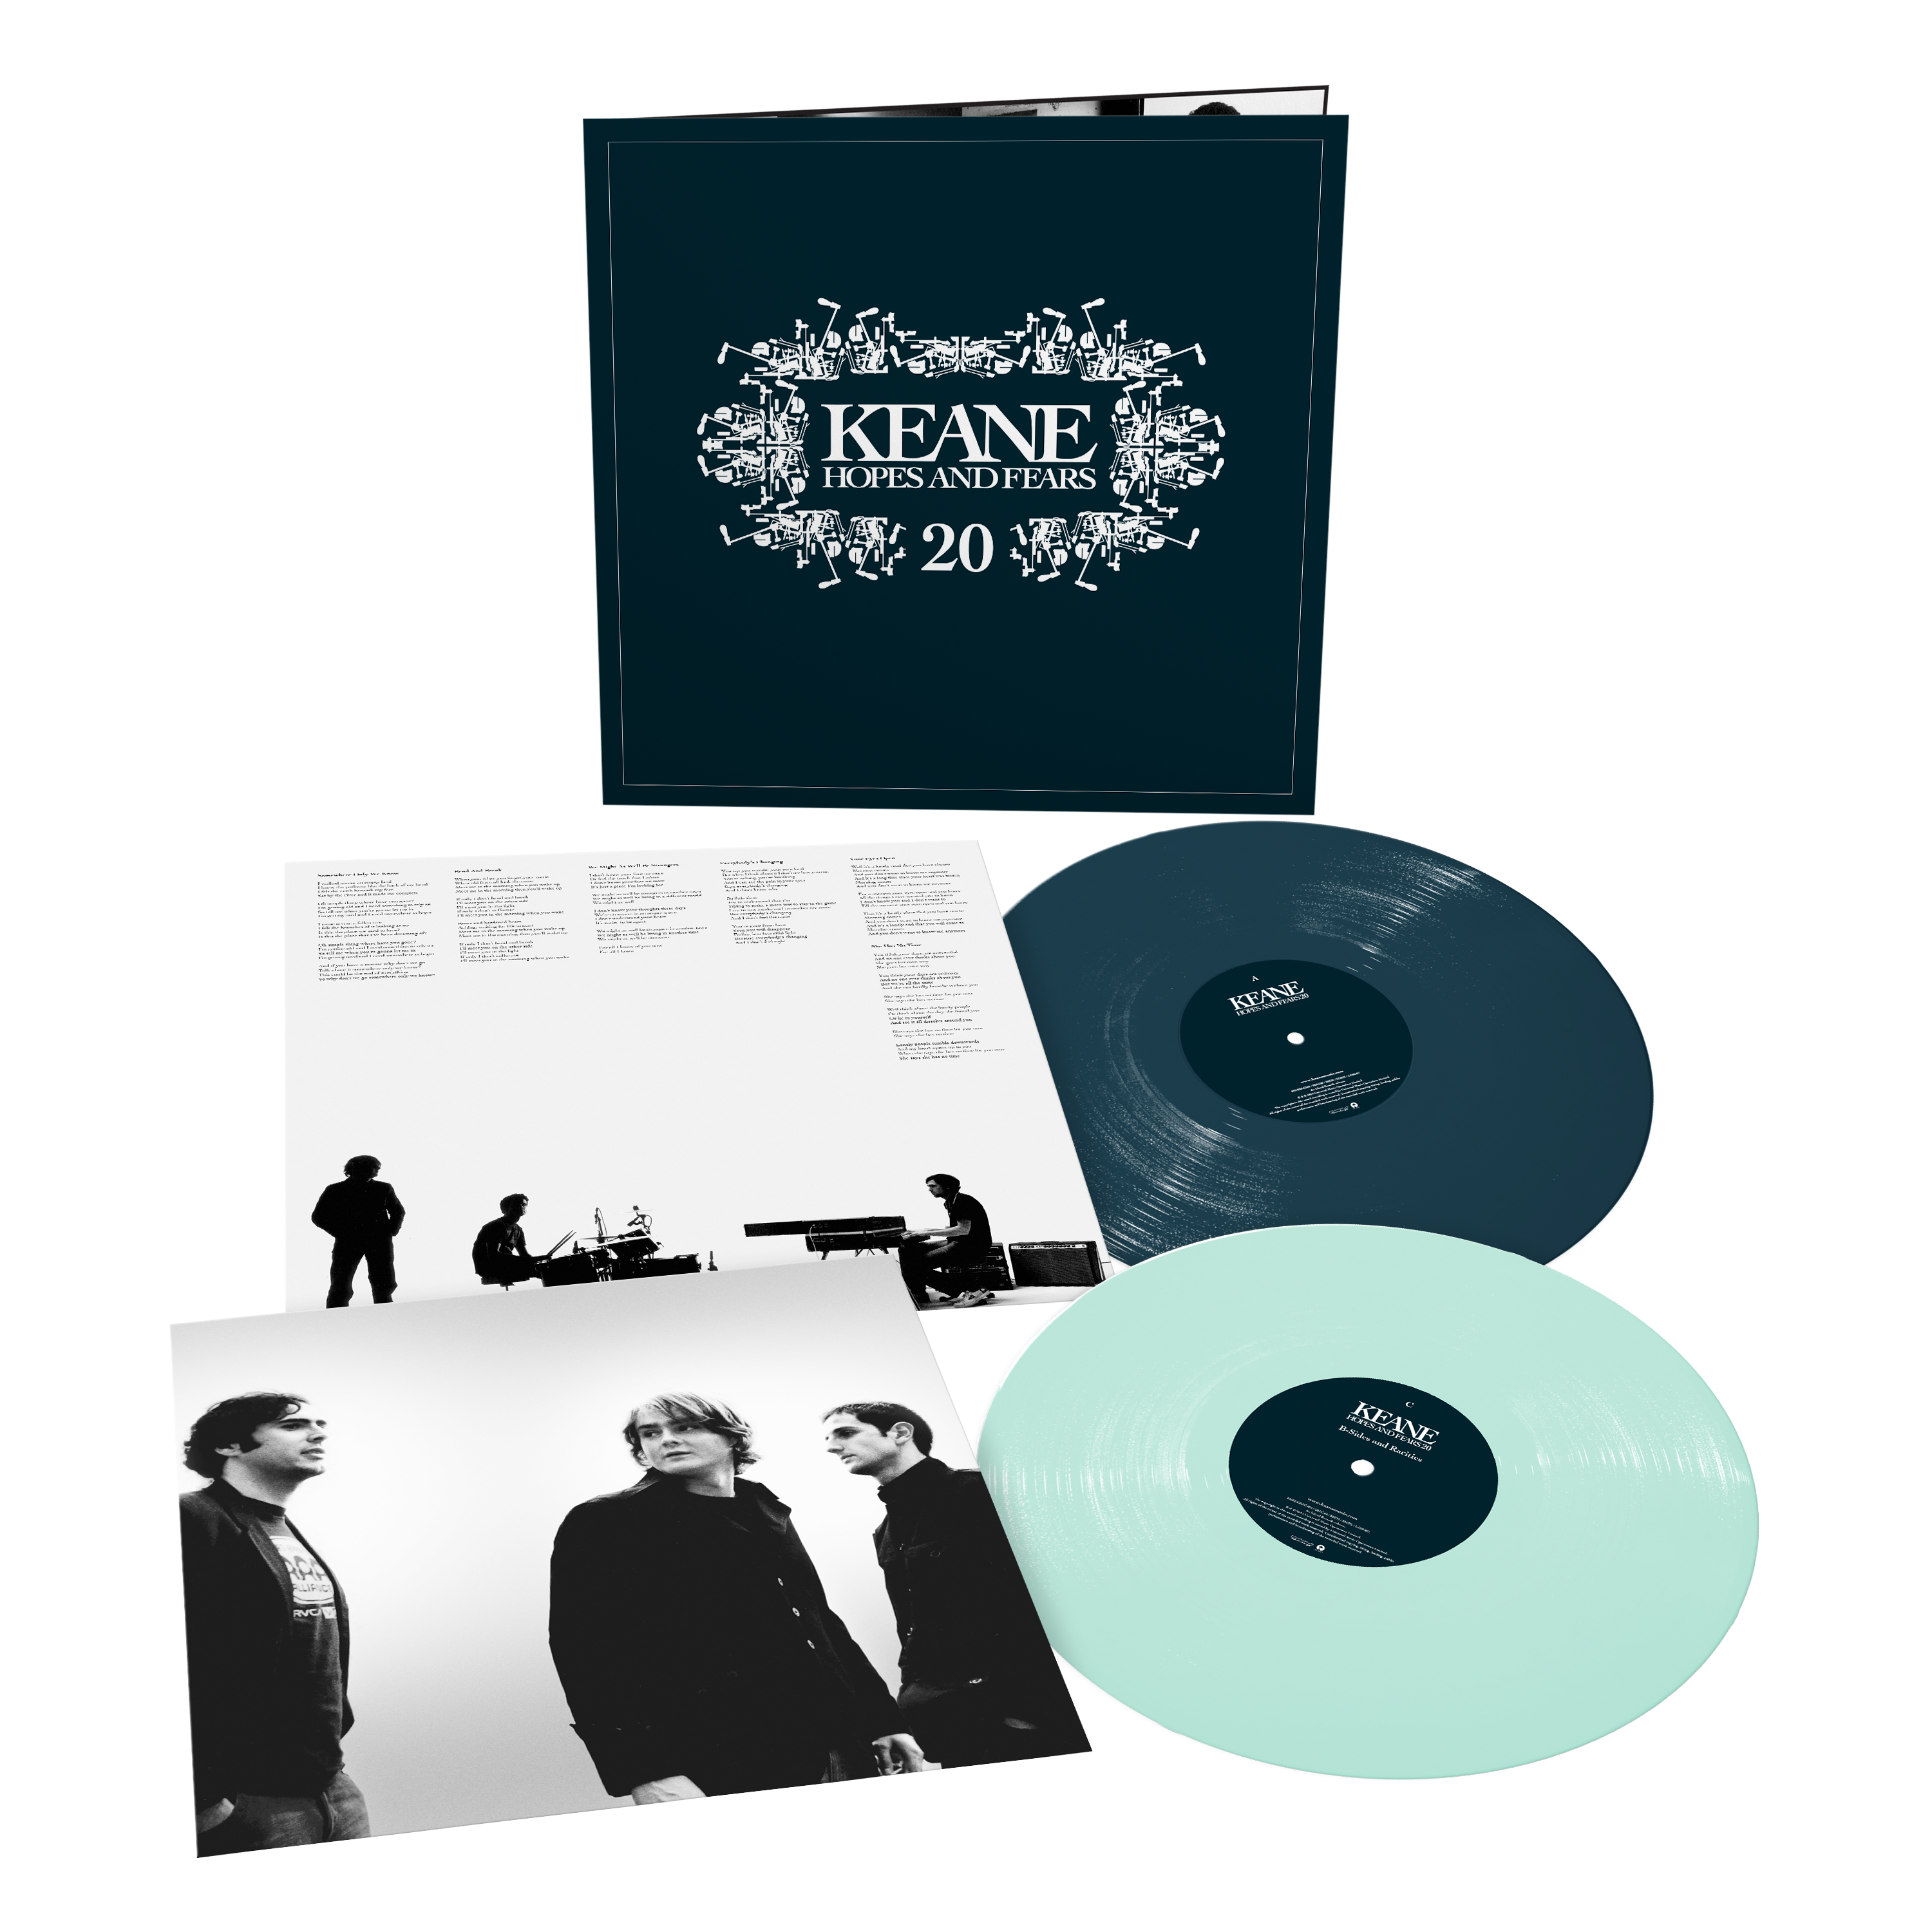 Keane - 20th Anniversary Hopes and Fears Limited 2LP Colour Vinyl